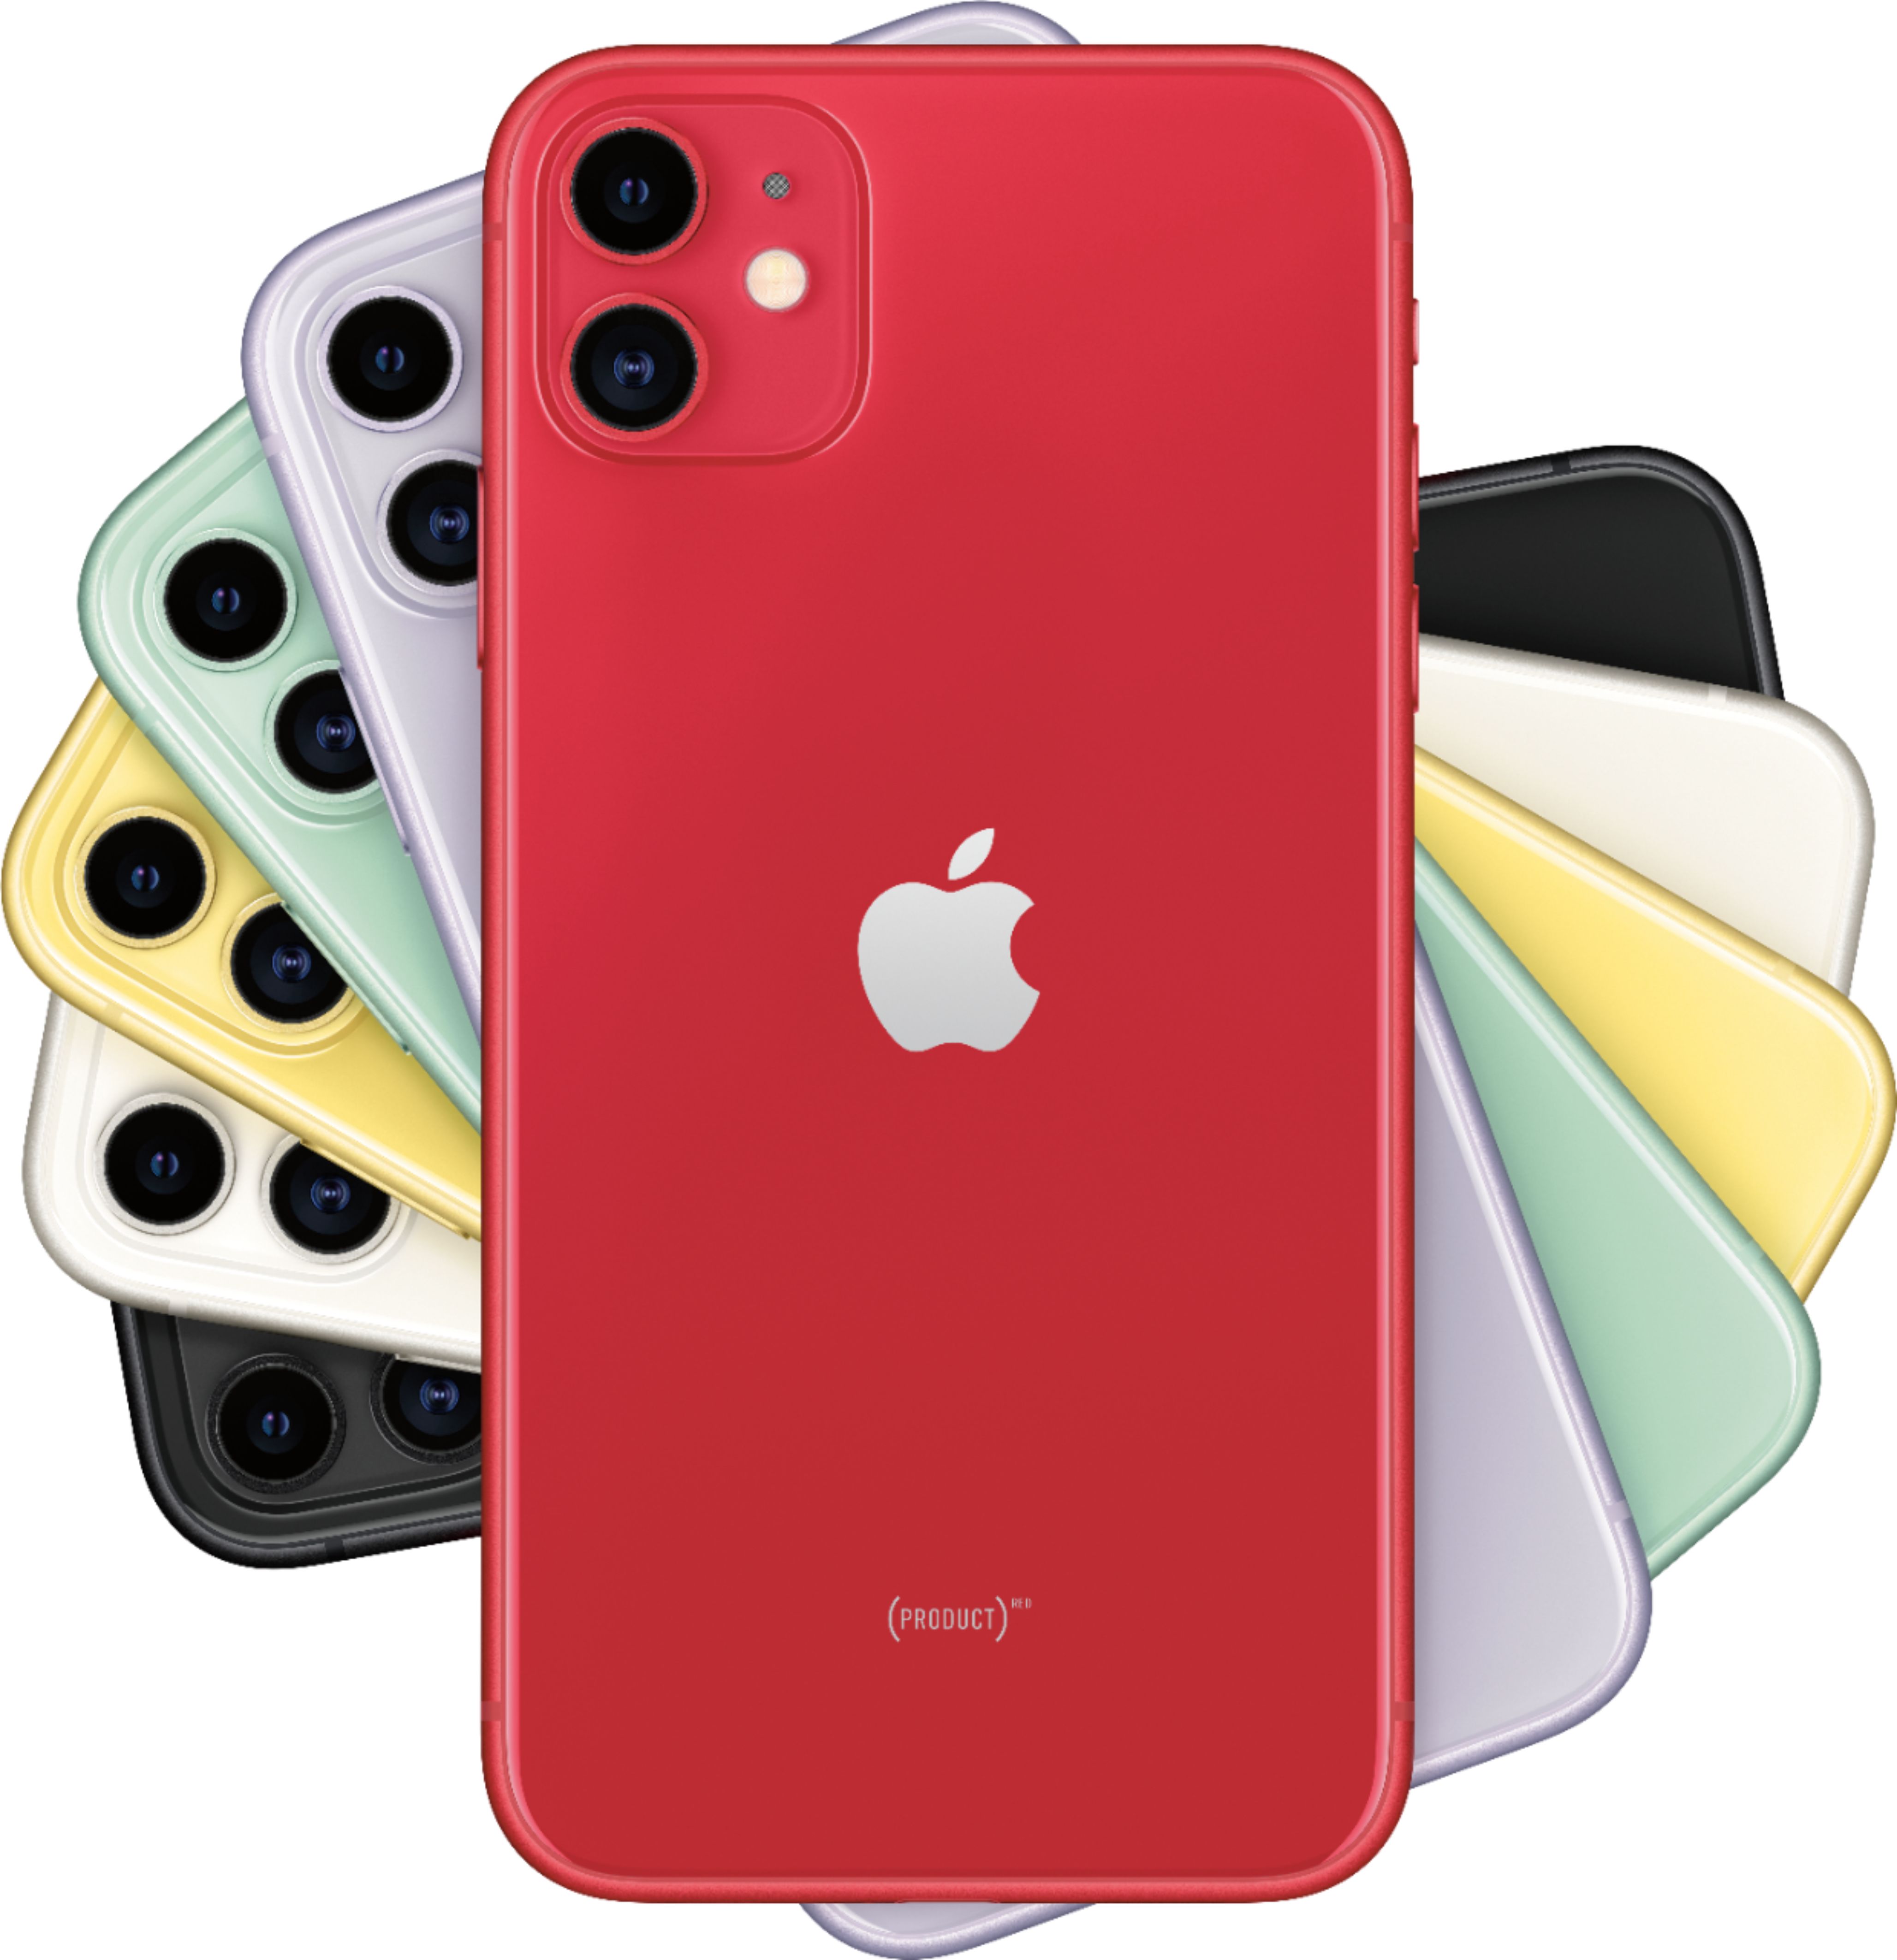 iPhone 11 (PRODUCT)RED 256 GB docomo